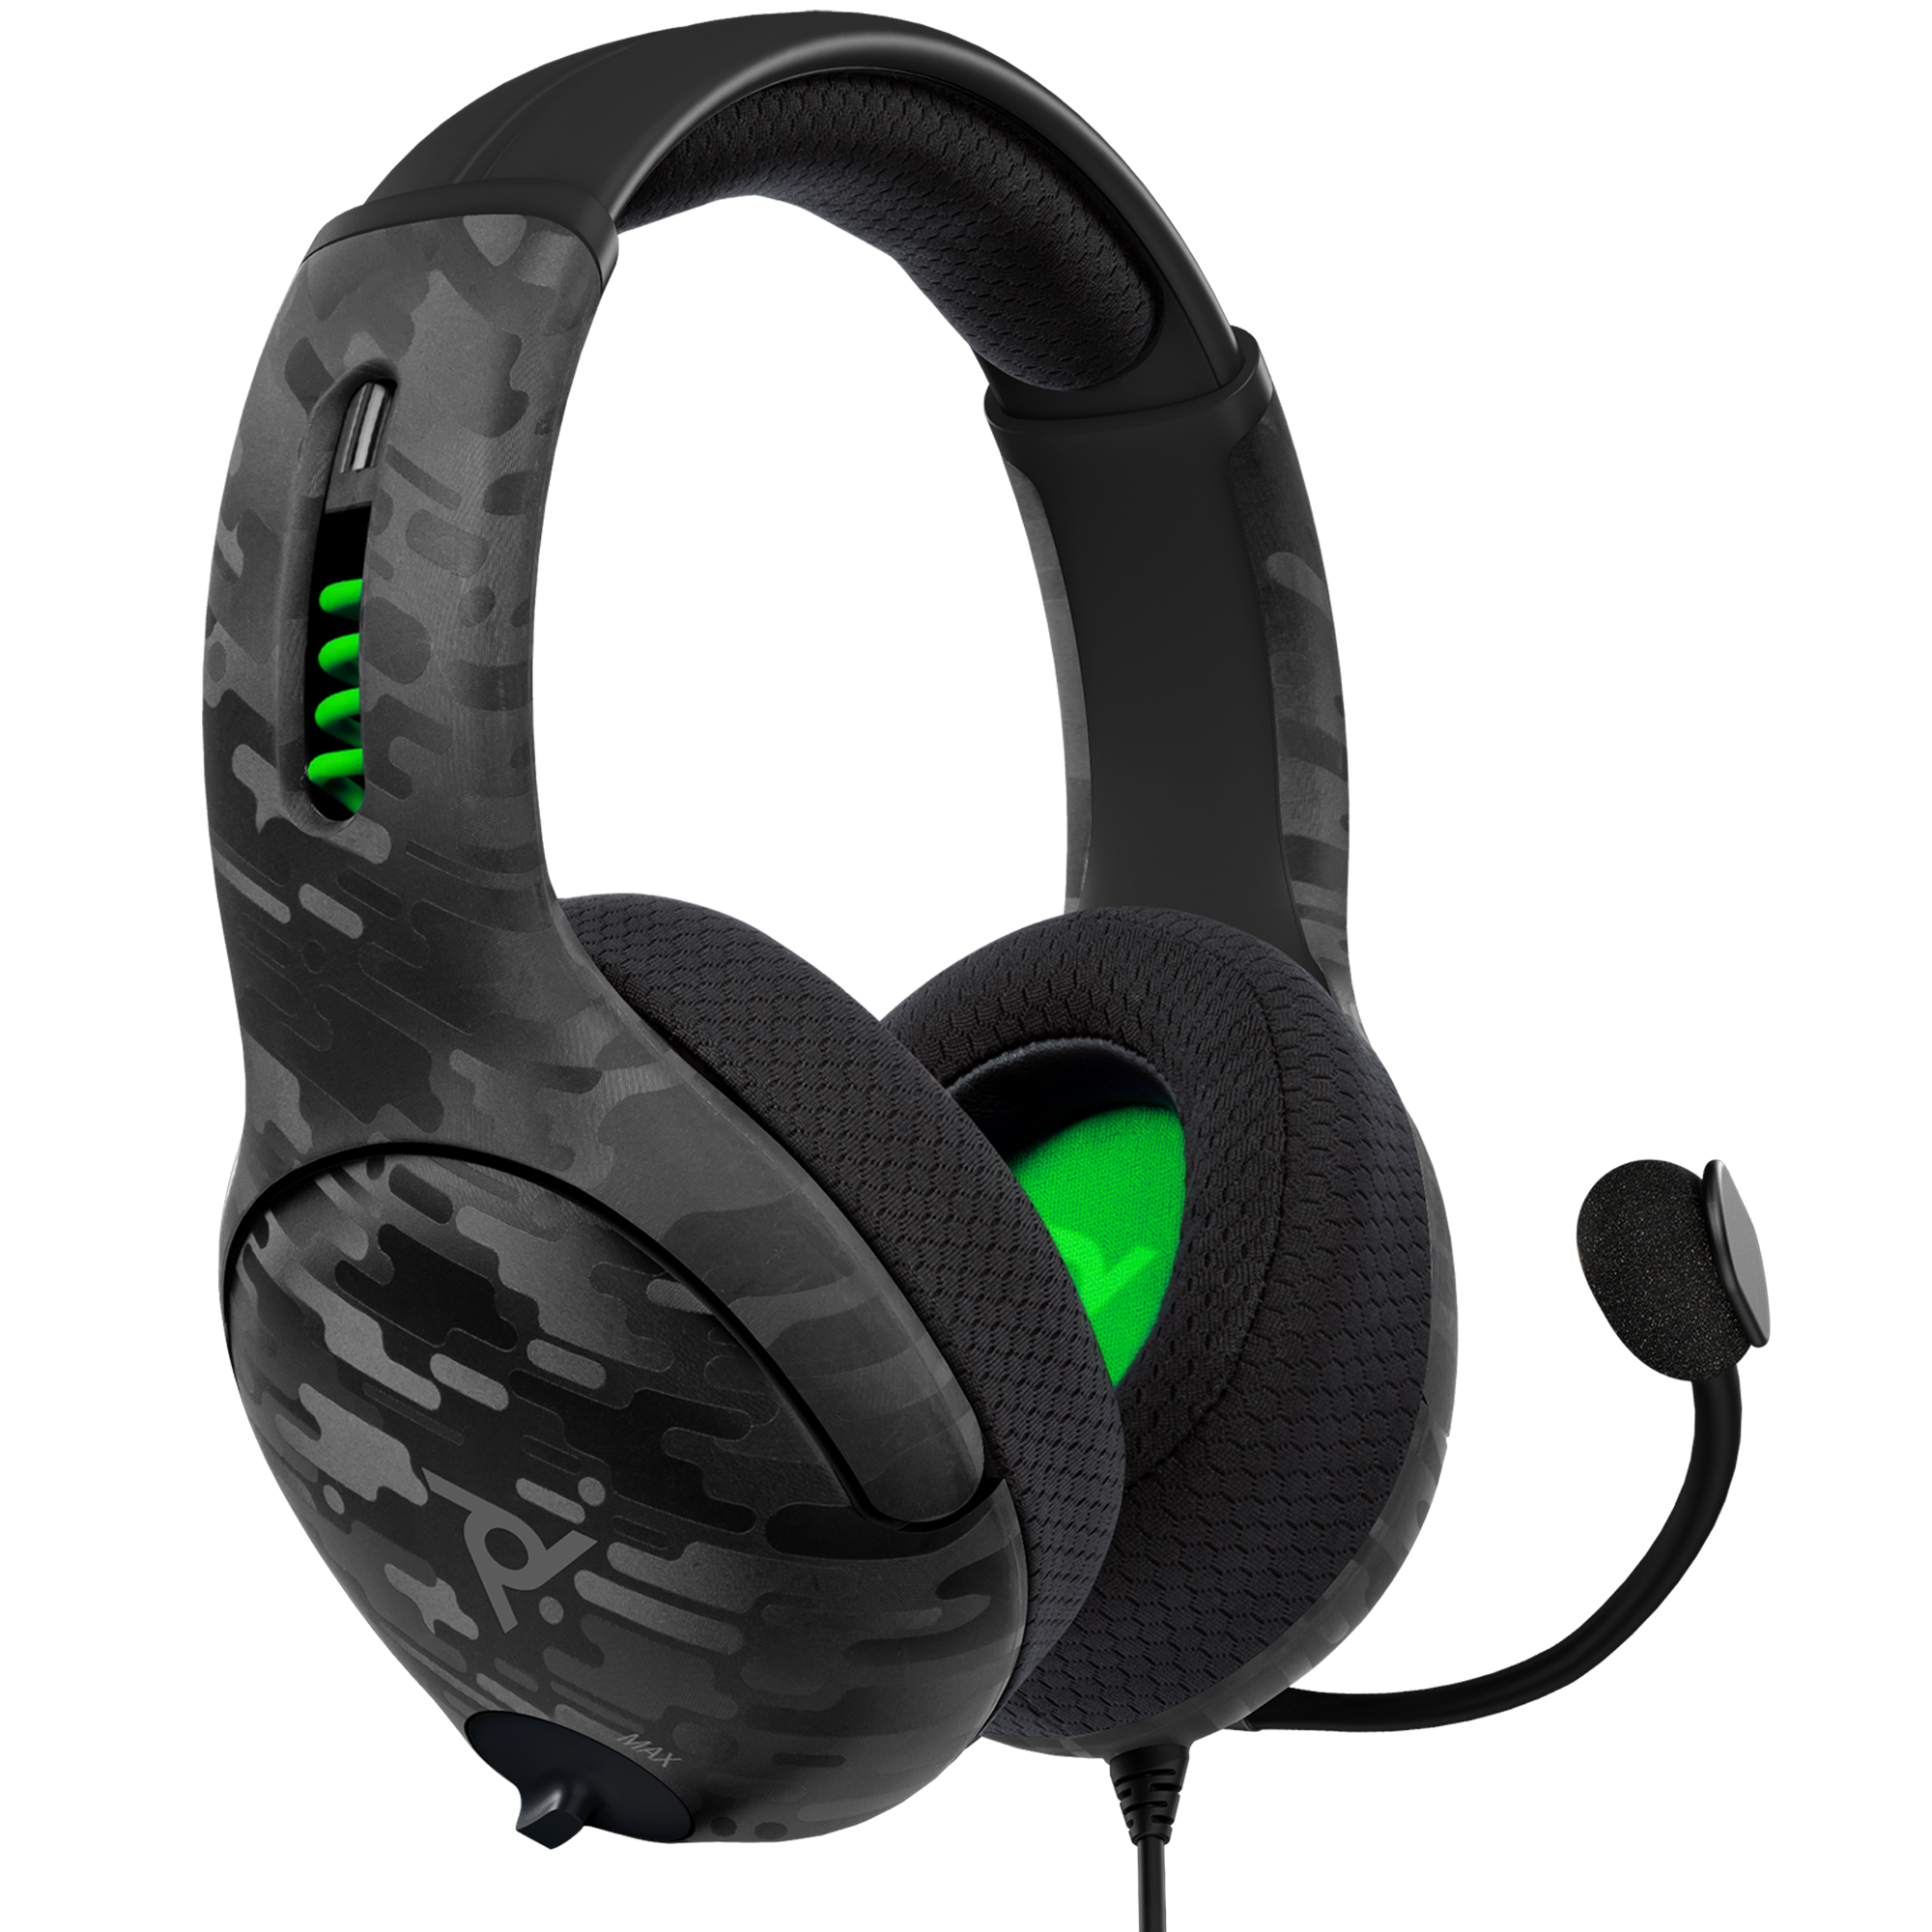 Casque Gaming Xbox PDP AG6